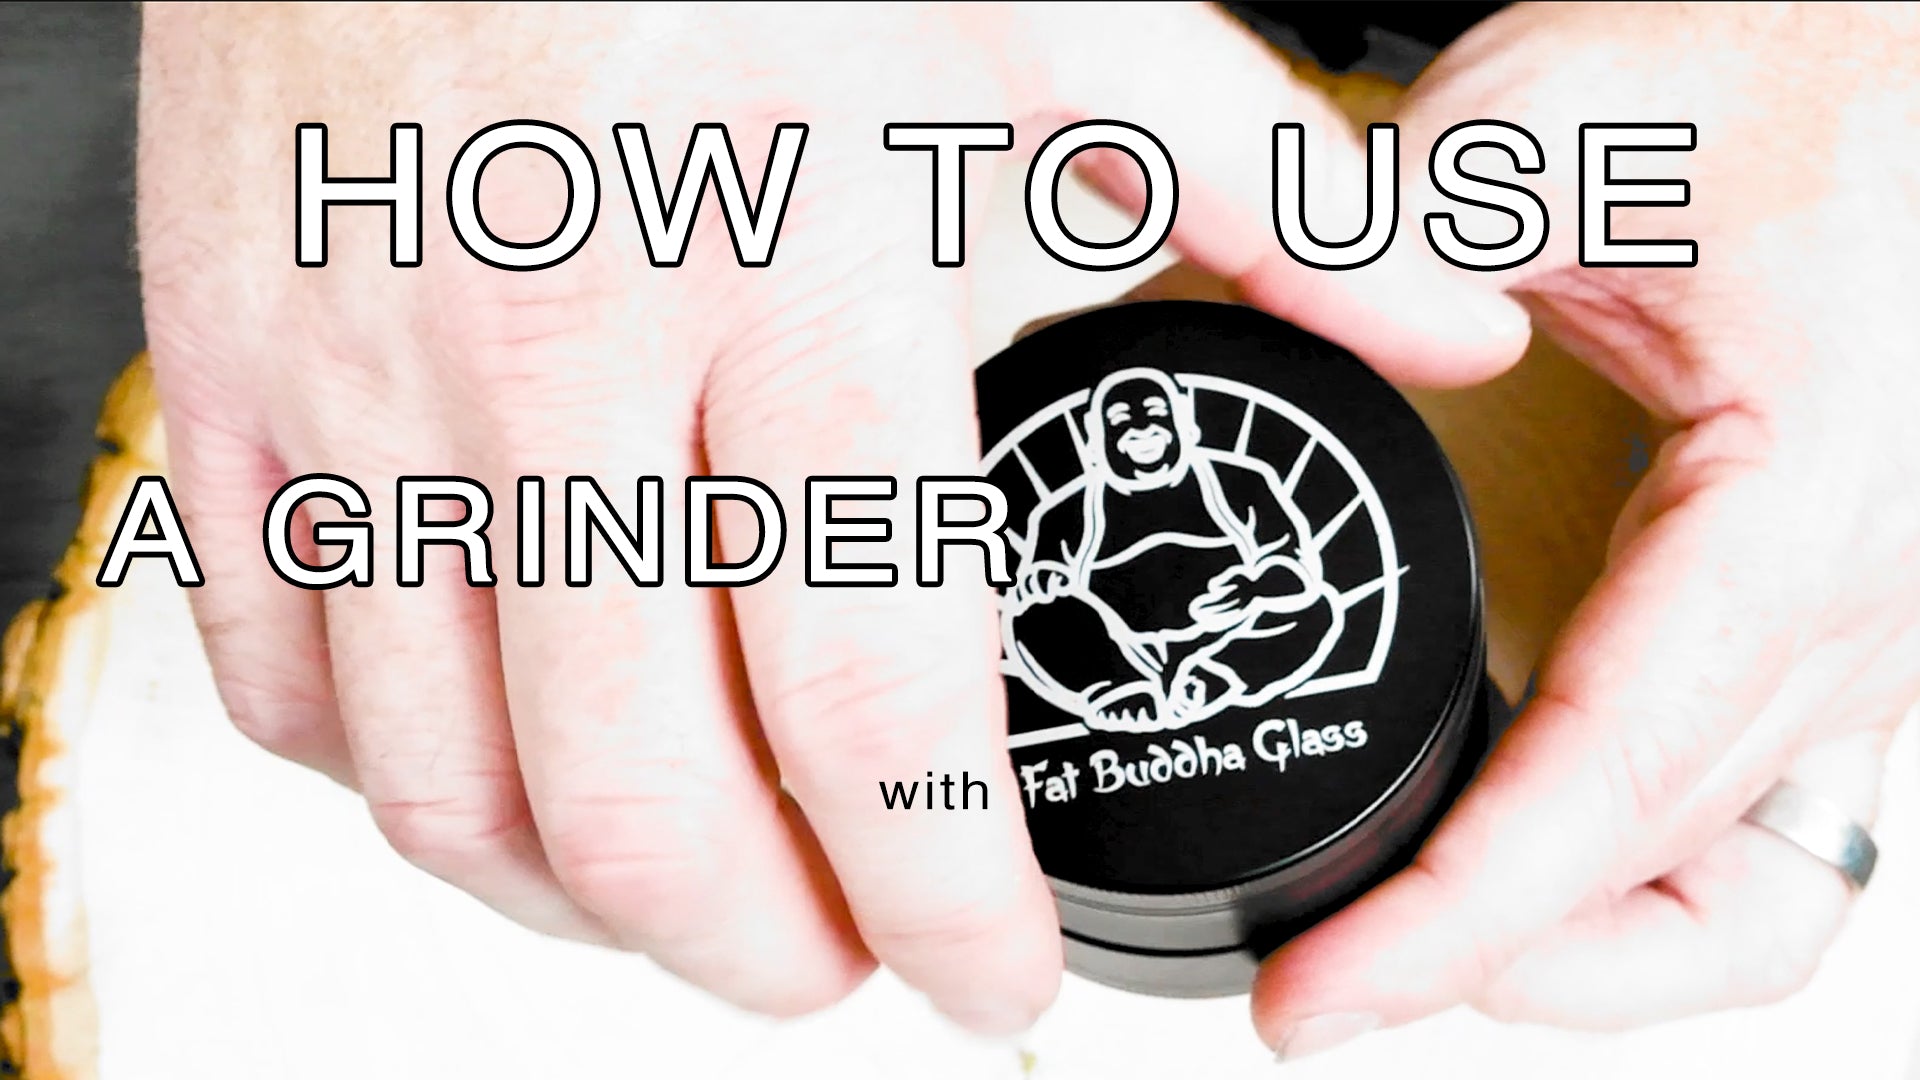 How to use a grinder